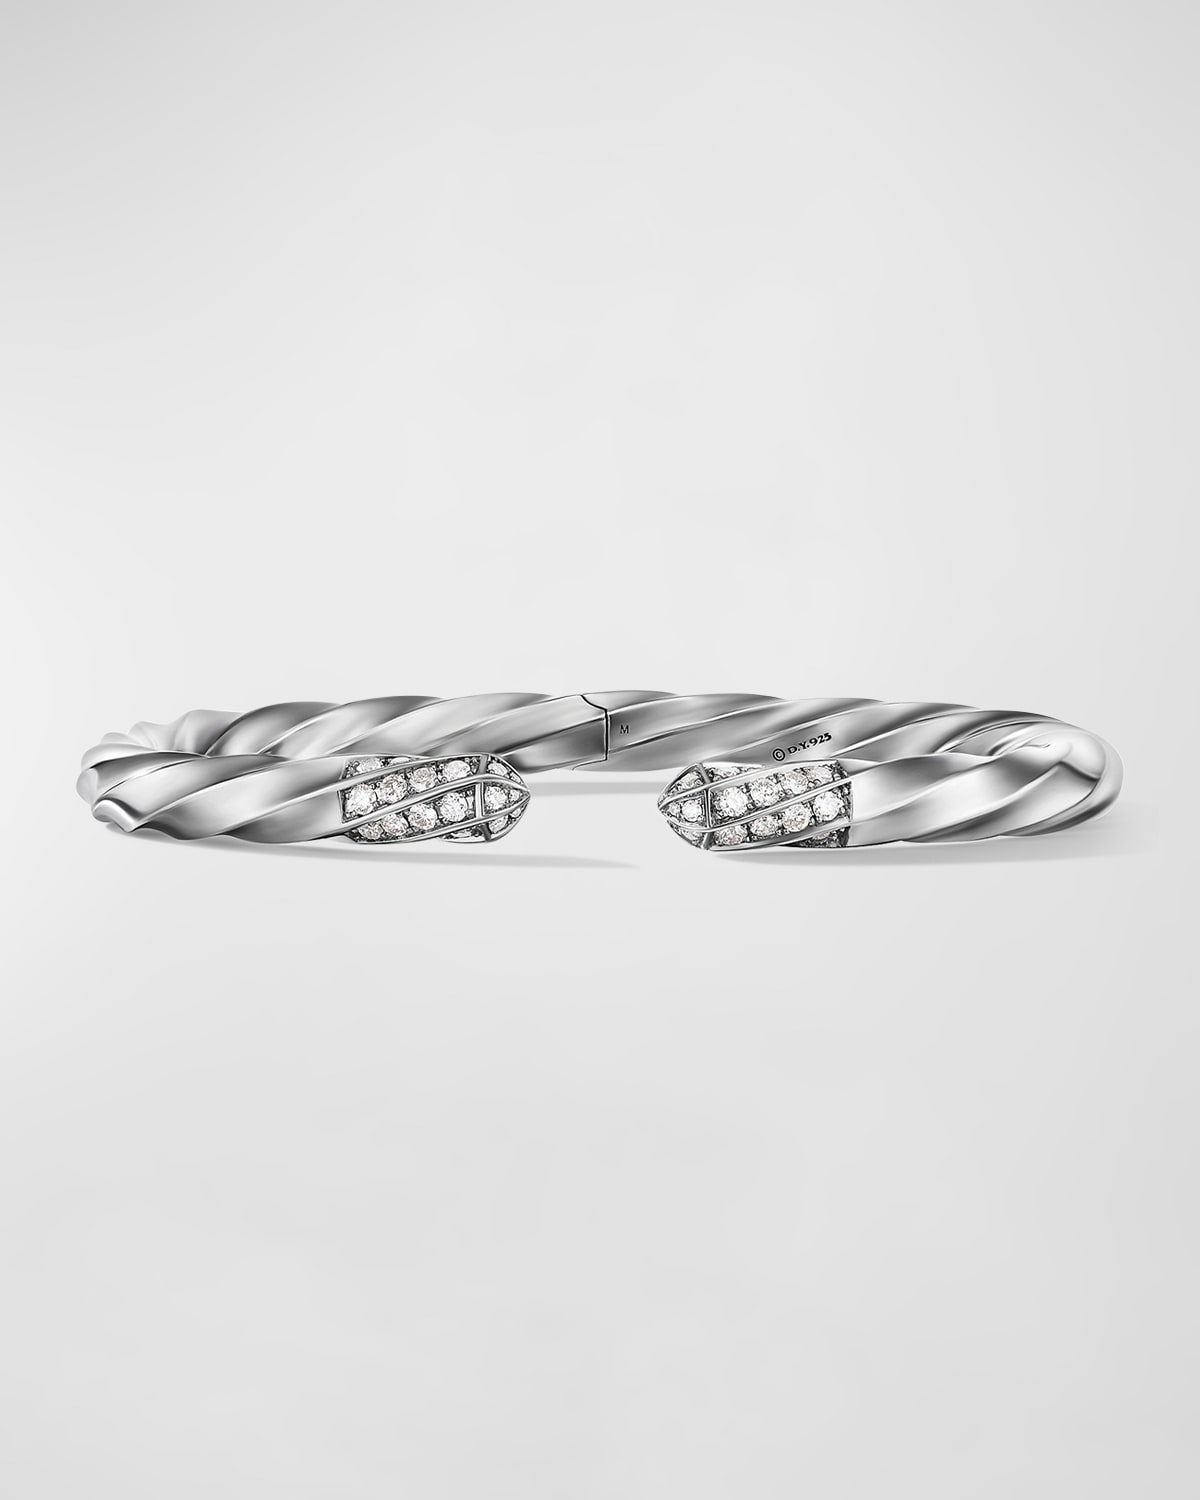 Cable Edge Bracelet with Diamonds in Silver, 5.5mm